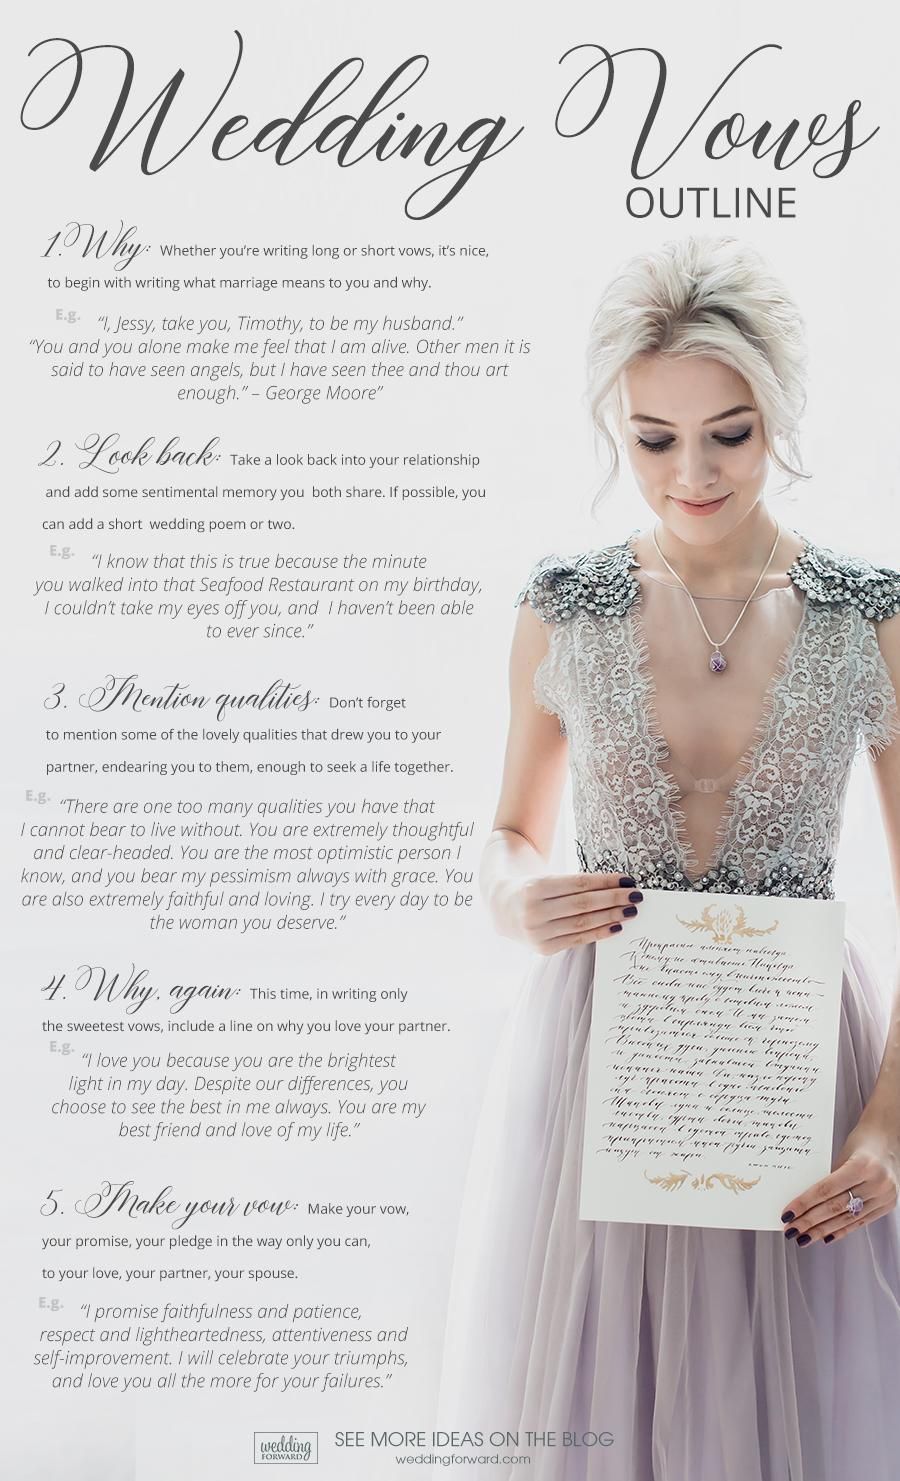 59 Wedding Vows For Her: Examples And Outline -   15 wedding DIY crafts ideas